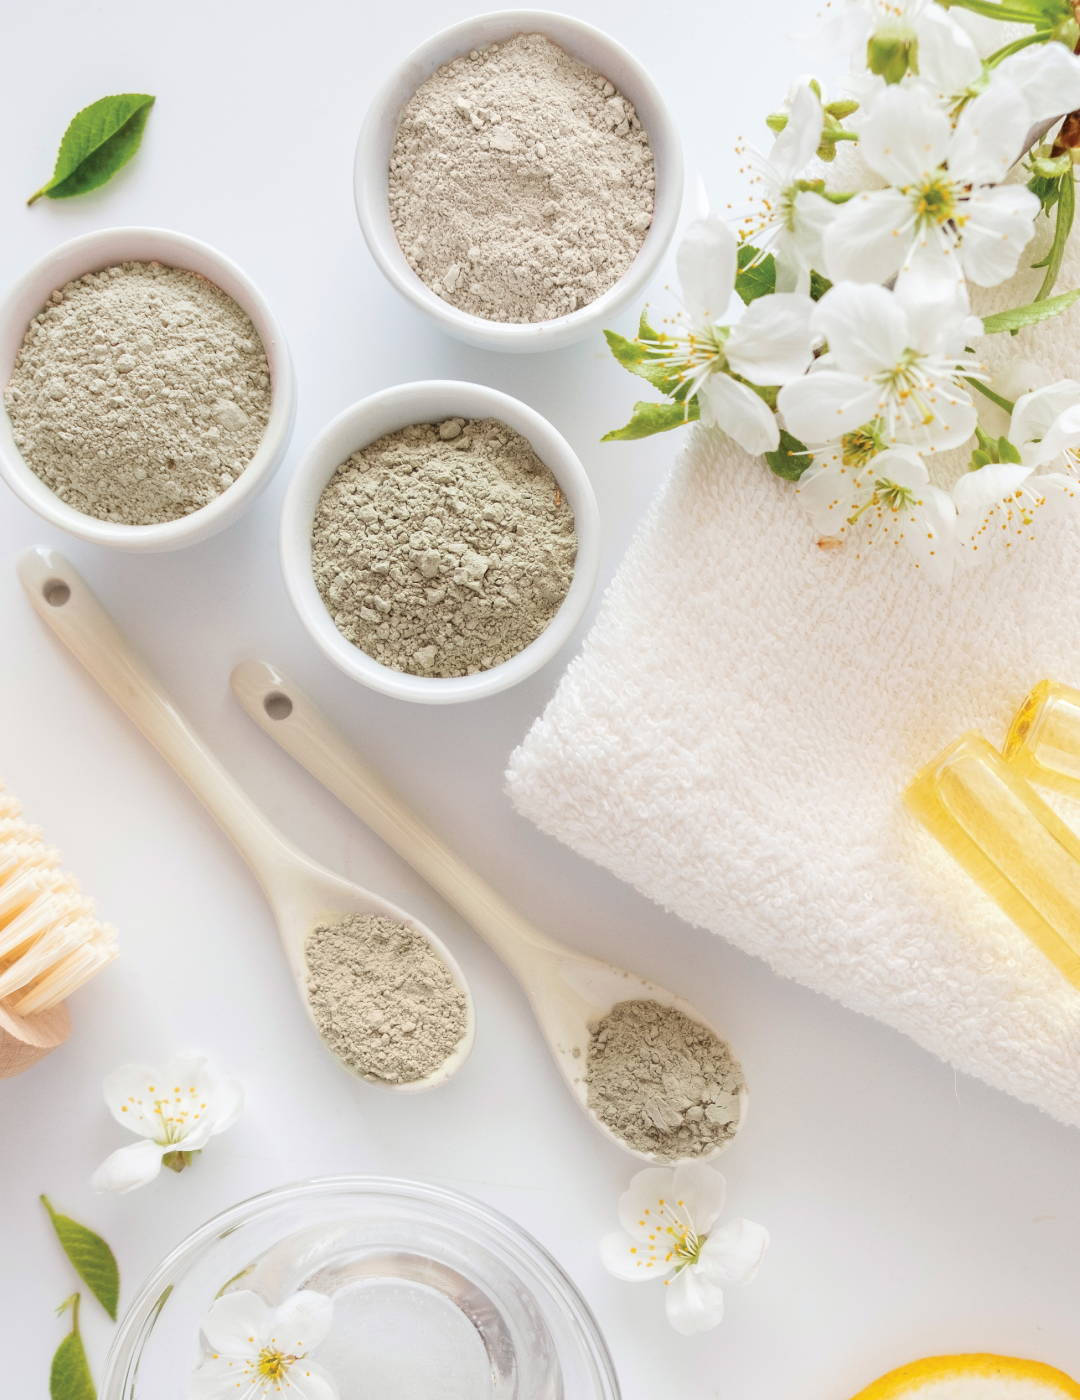 Bentonite Clay For Beauty: Benefits, Uses, And Precautions Of This Skincare  Ingredient